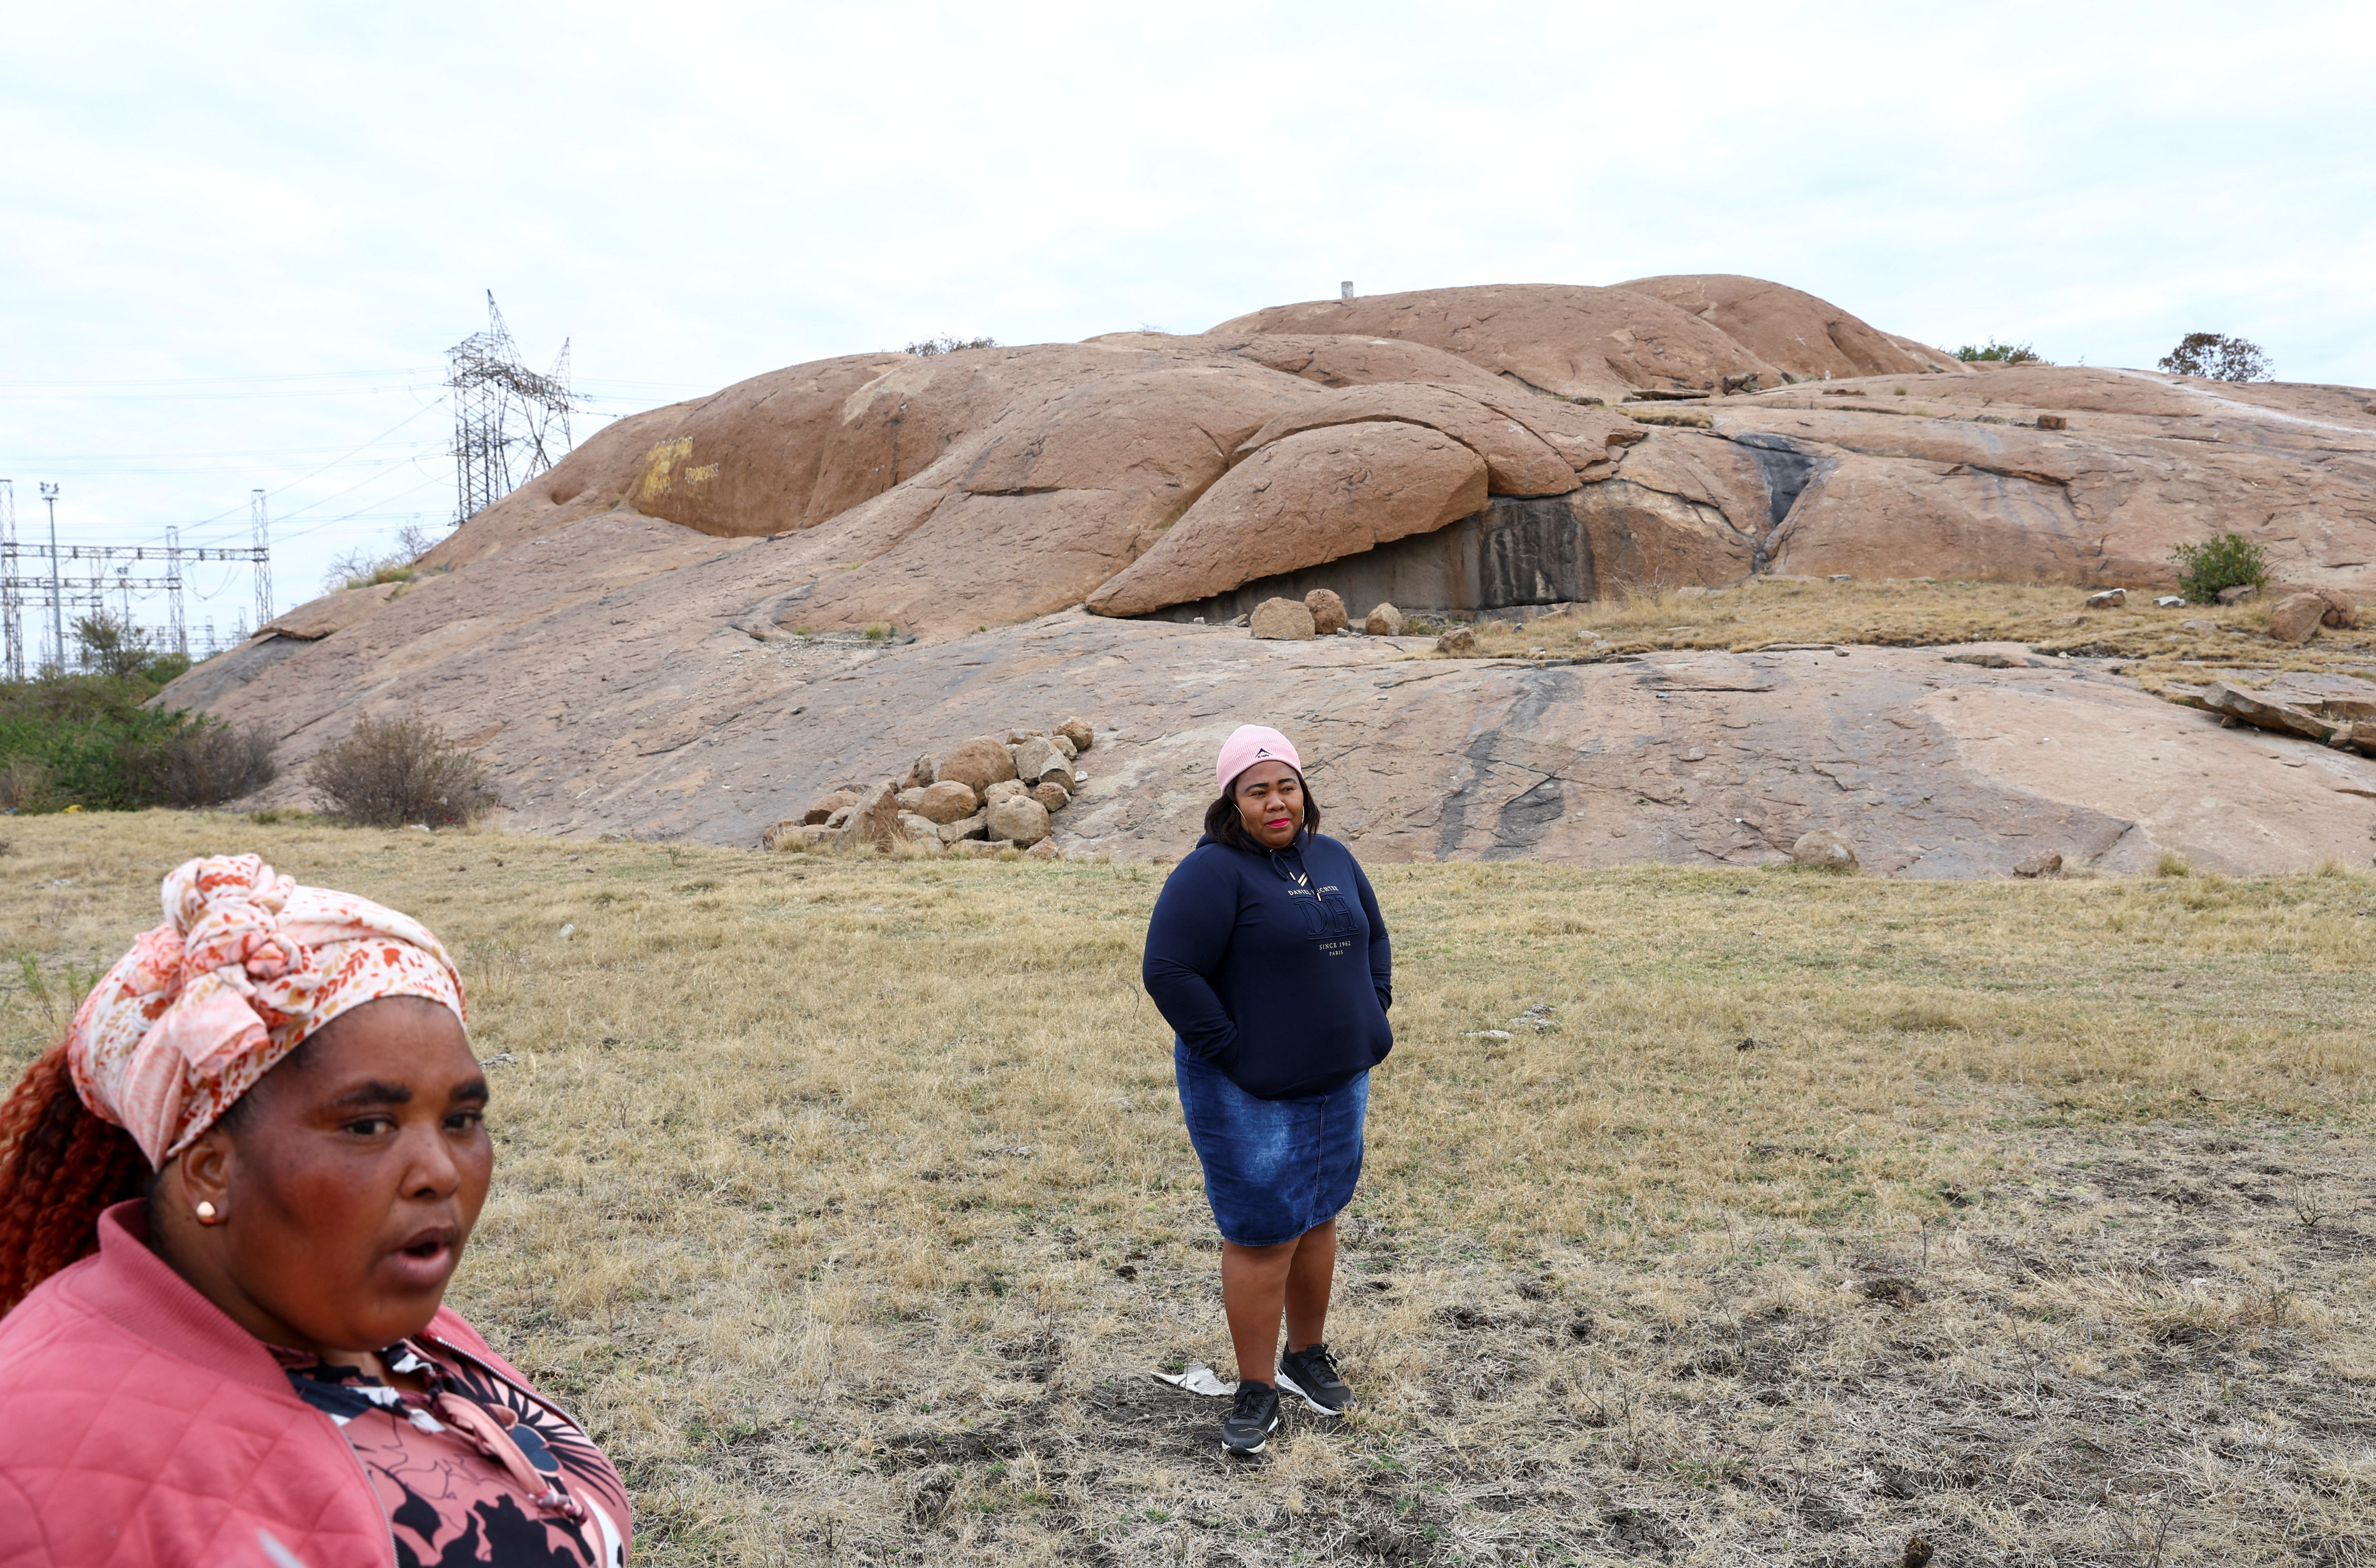 Zameka Nungu and Nosihle Ngweyi, two widows who lost their husbands during the brutal killing of miners, speak near the Lonmin mine in Rustenburg